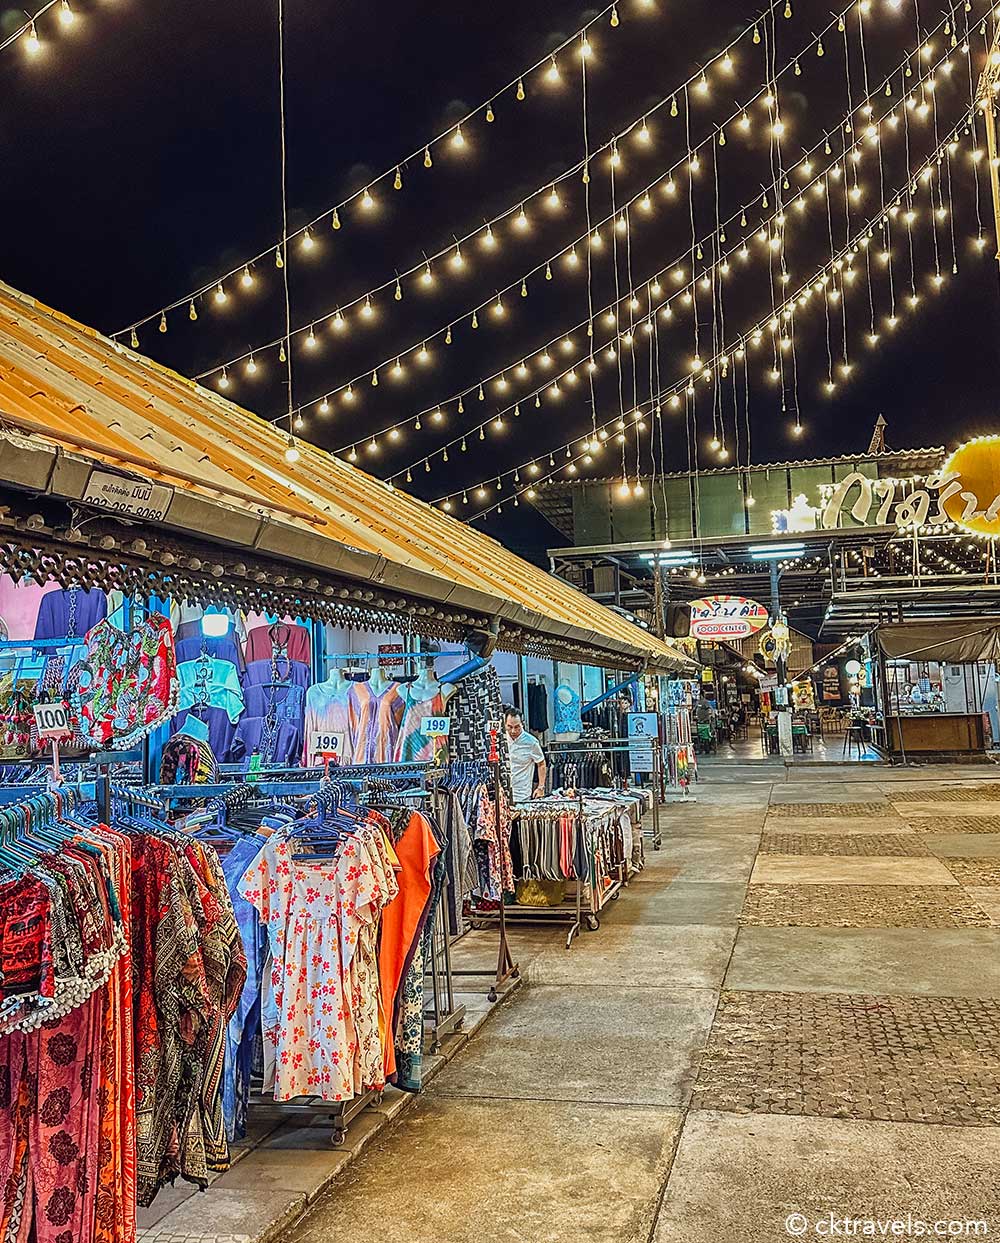 5 Best Markets and Night Markets in Chiang Mai - Where to Go Shopping like  a Local in Chiang Mai? – Go Guides